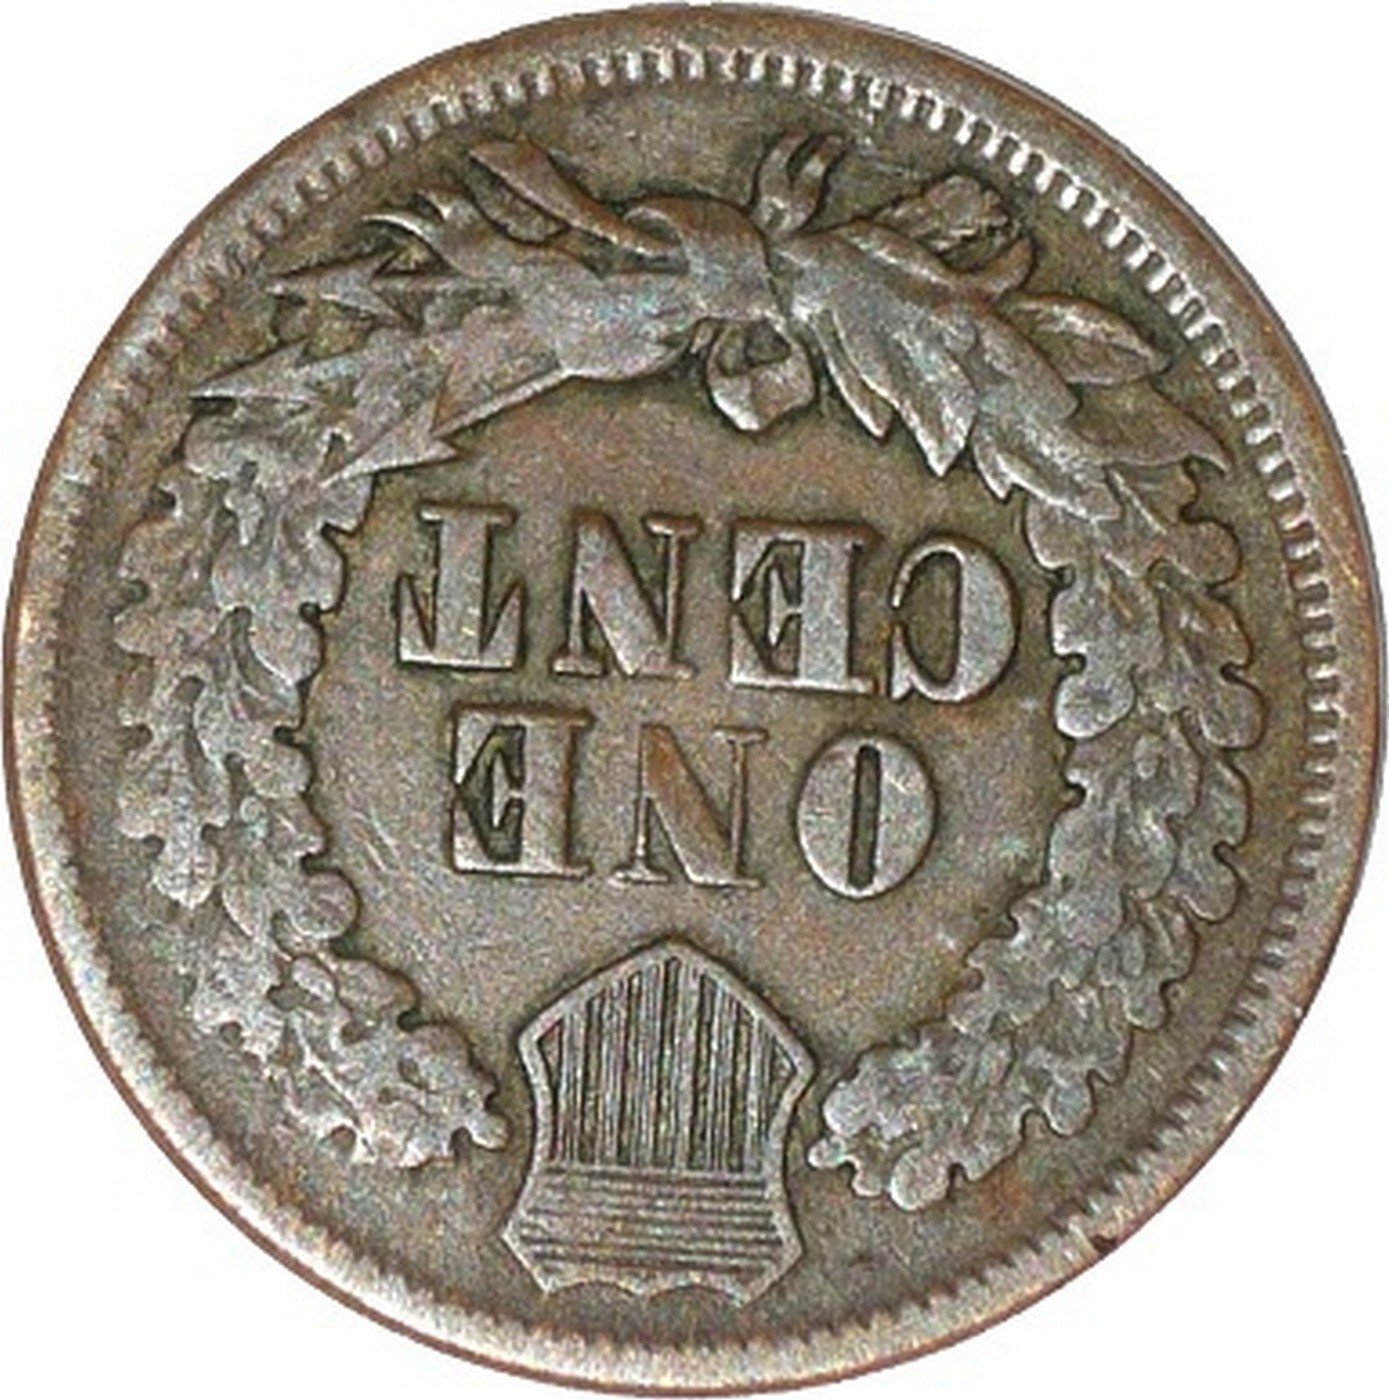 1864 No-L ROT-001 - Indian Head Penny - Photo by David Poliquin